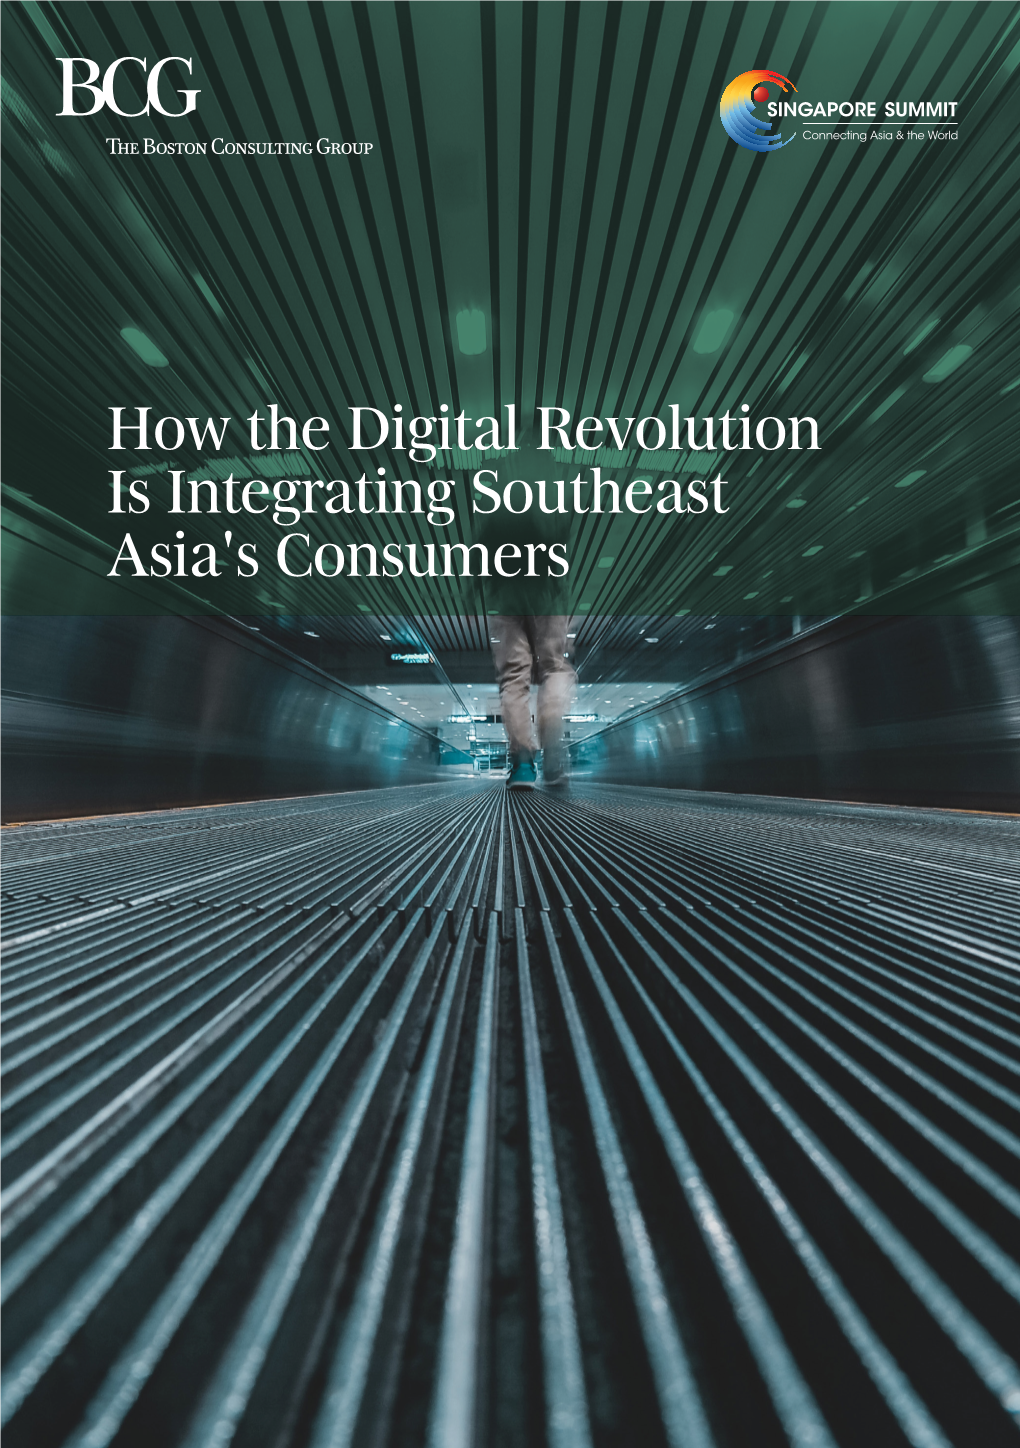 How the Digital Revolution Is Integrating Southeast Asia's